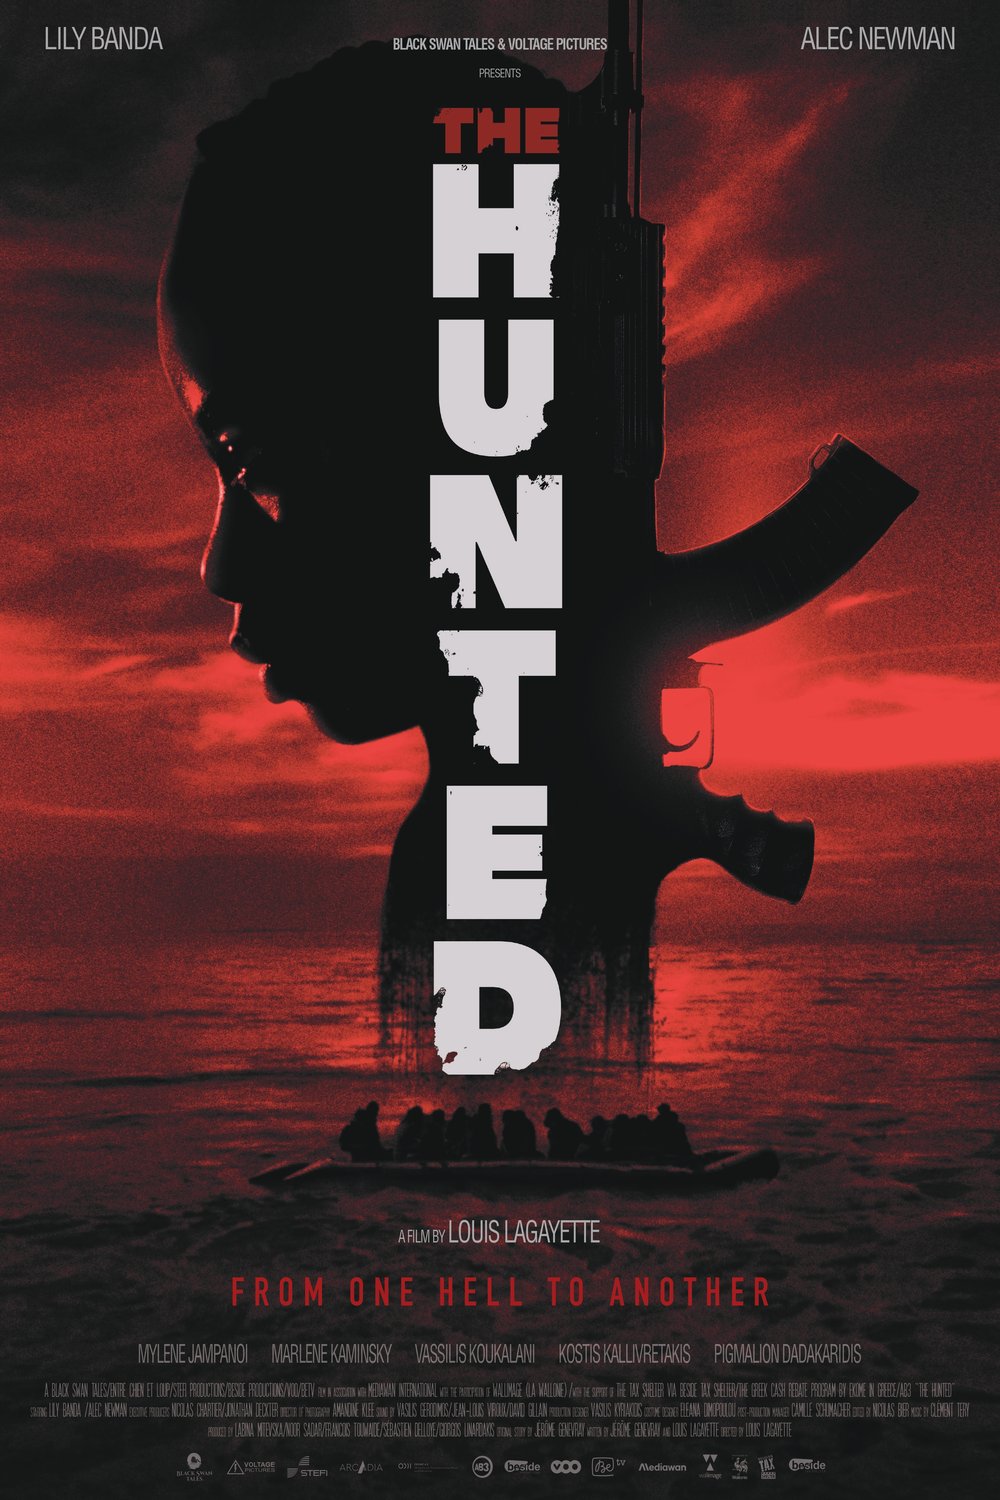 Poster of the movie The Hunted